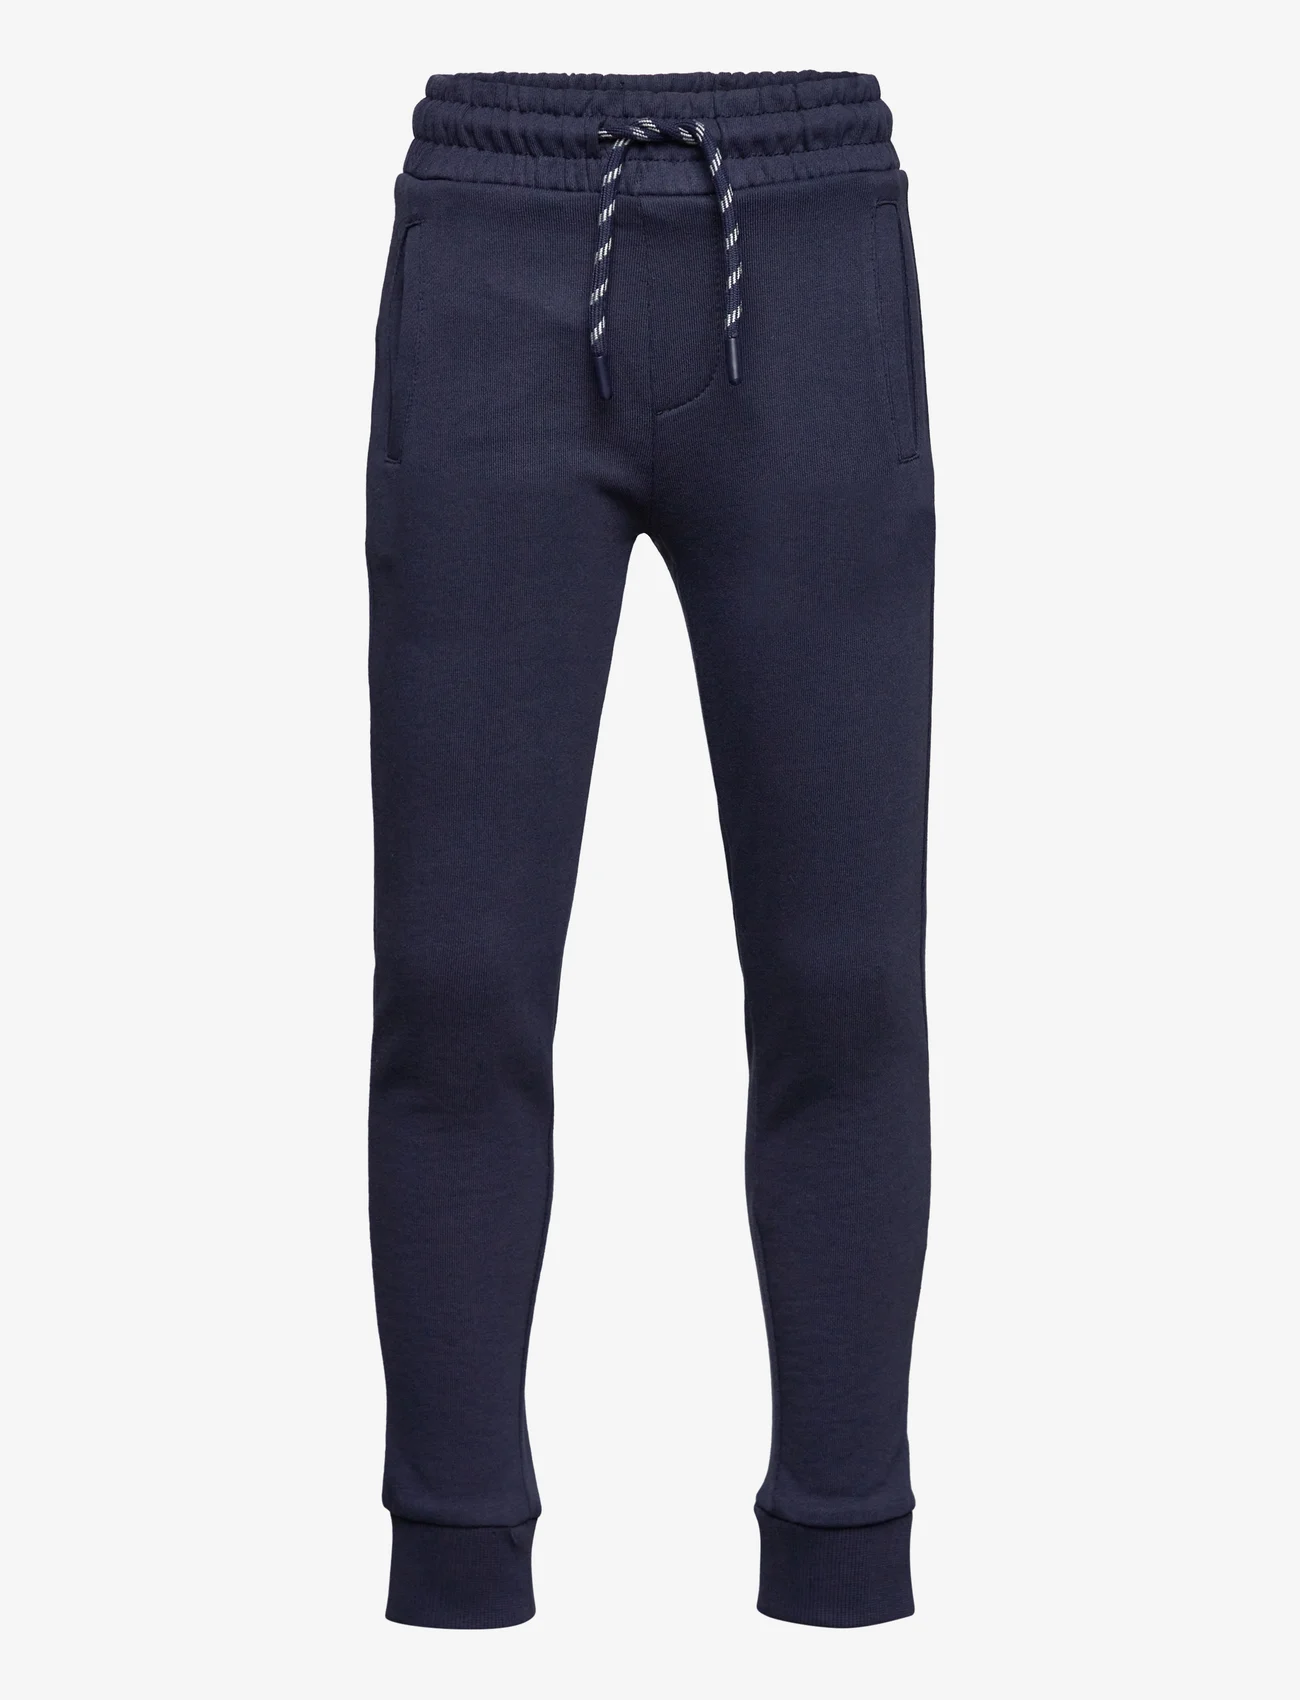 Mango - Cotton jogger-style trousers - navy - 0